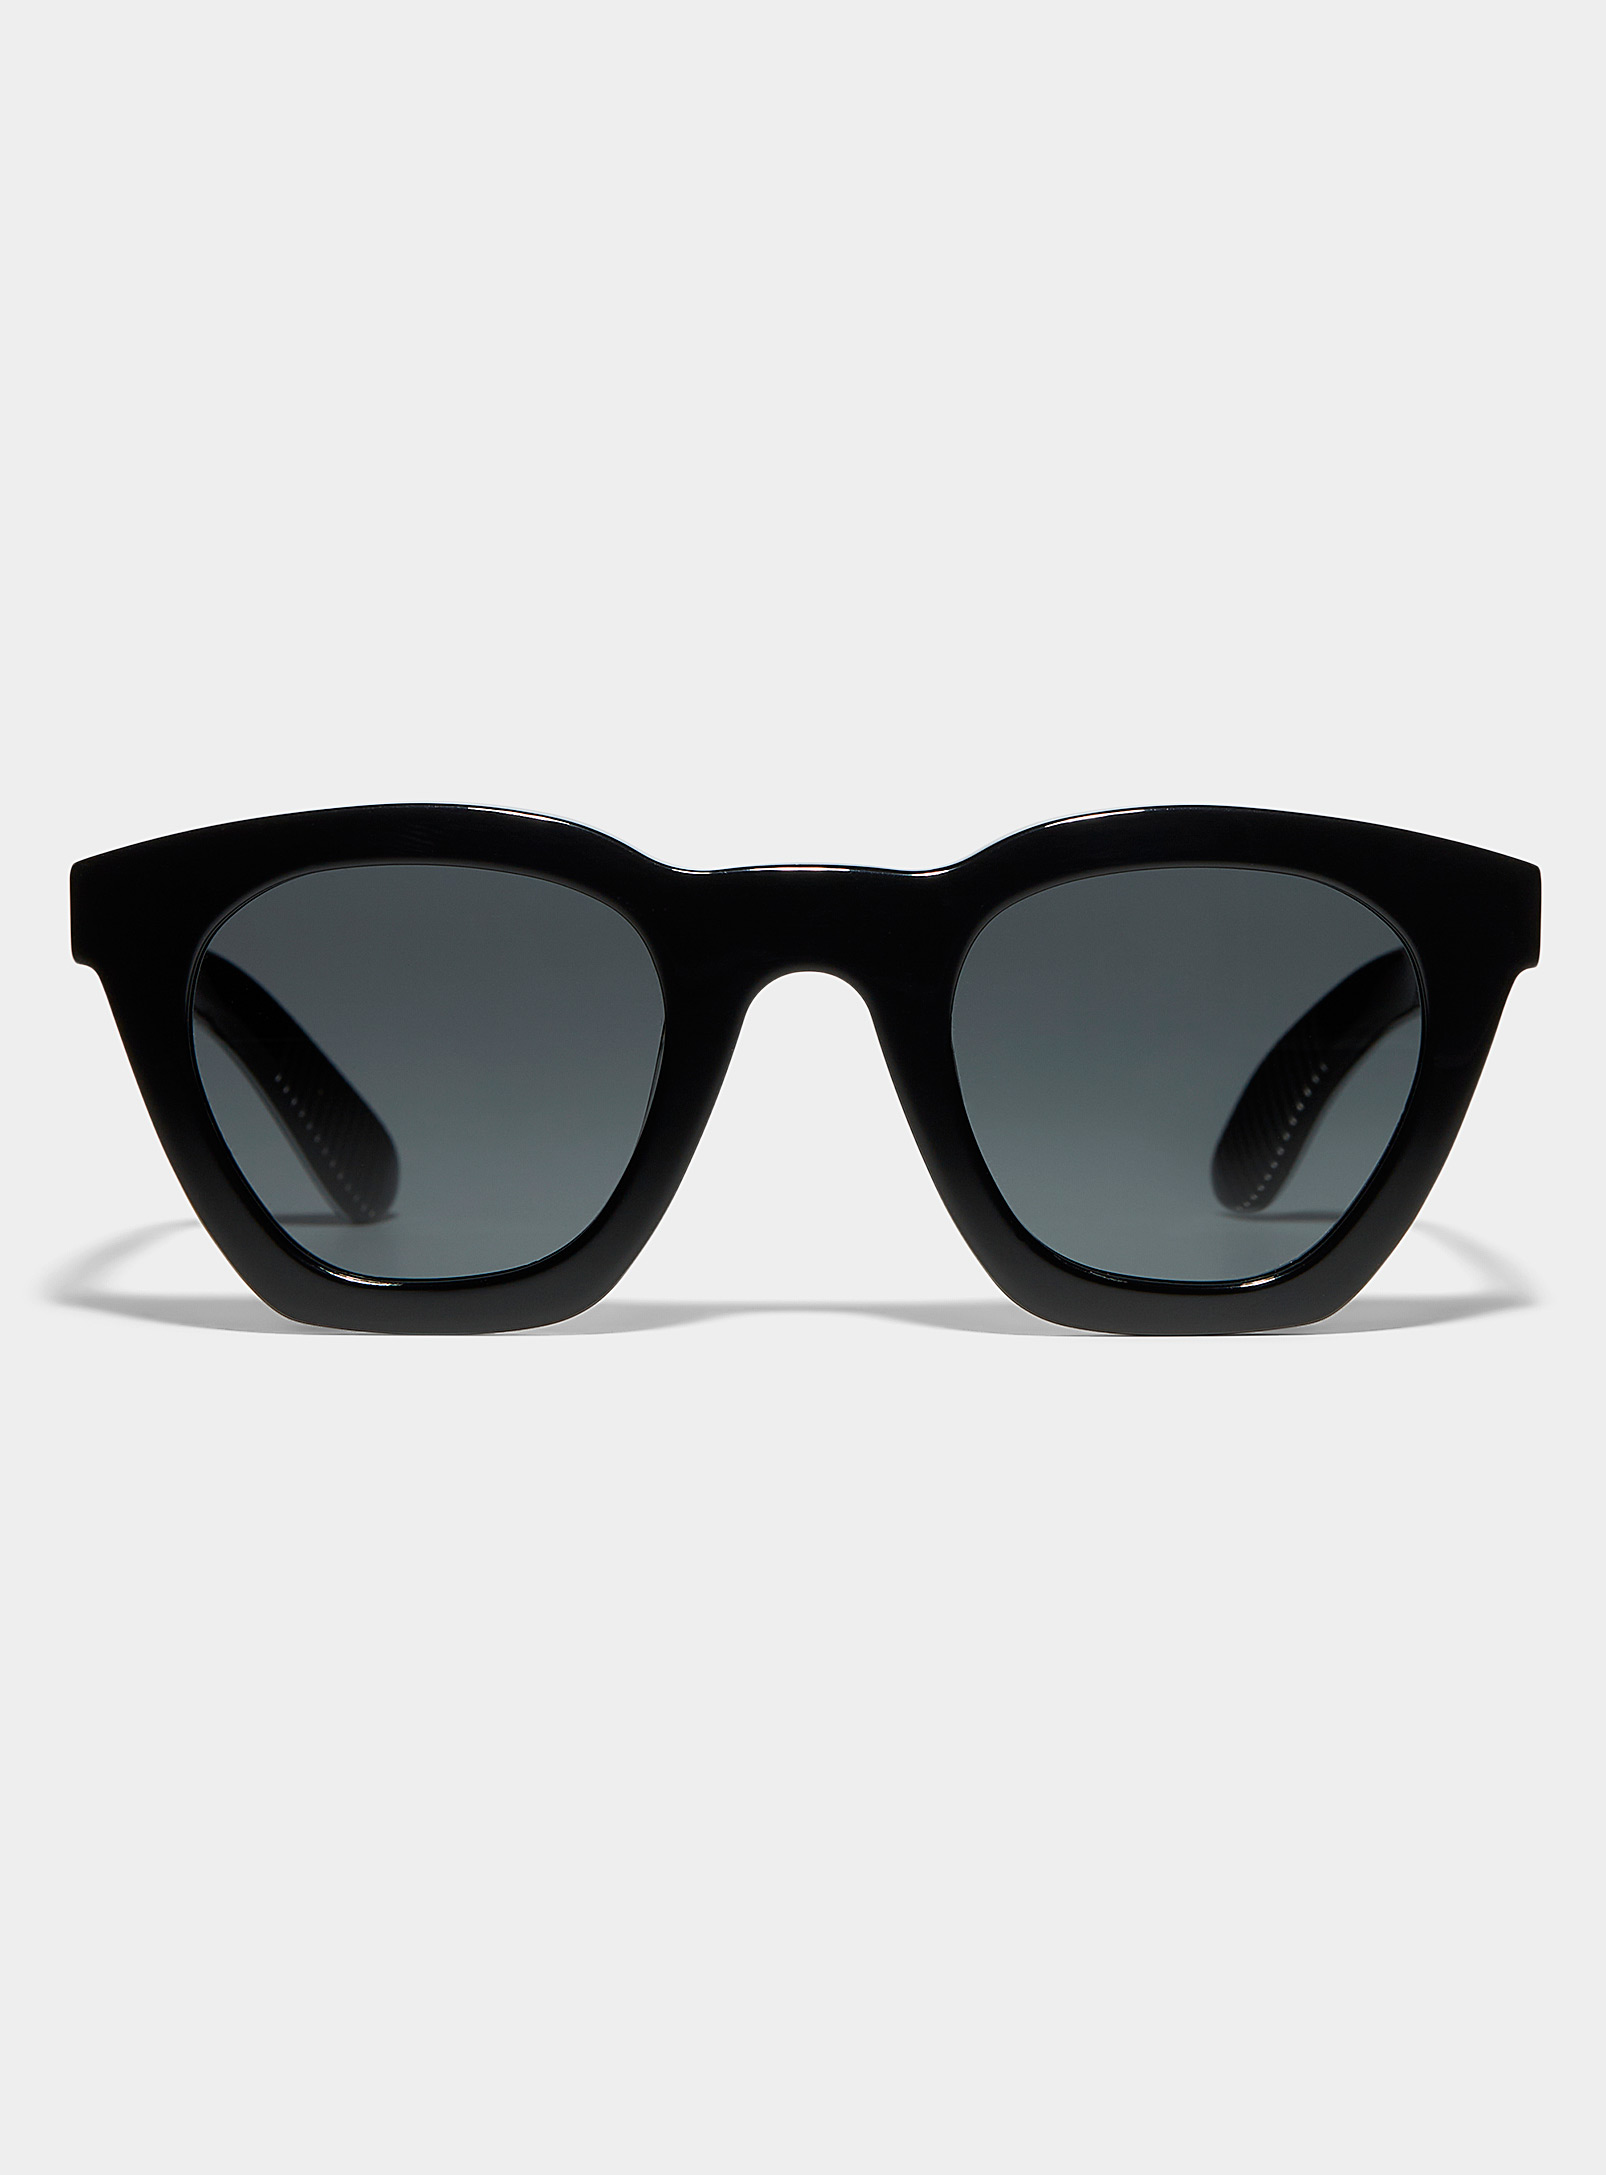 Spitfire Cut Sixty Four Sunglasses In Black